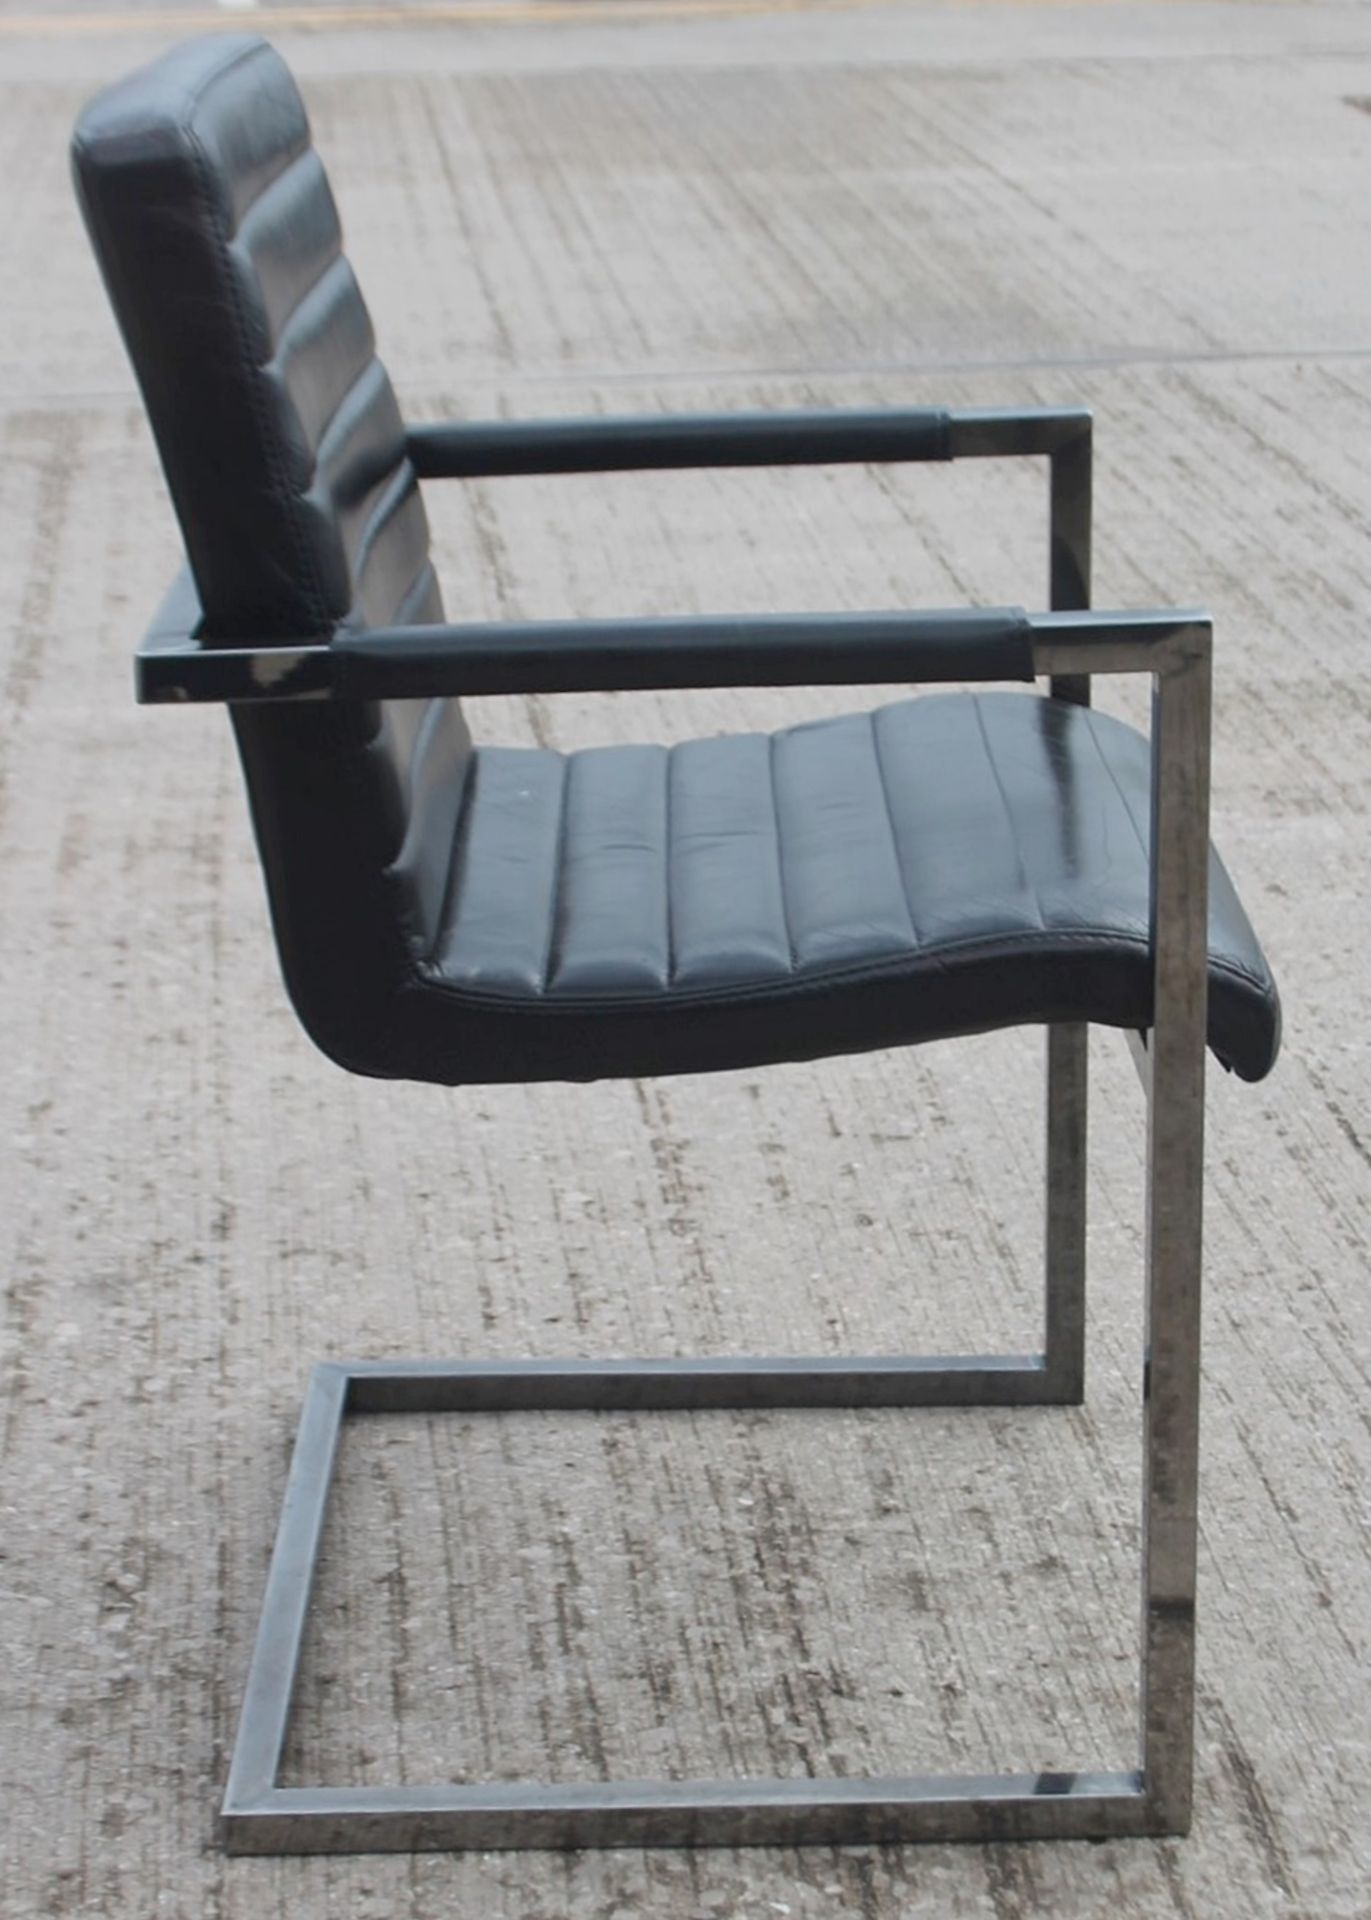 3 x Cantilever Ribbed Chairs In Black - Recently Relocated From An Exclusive Property - Ref: - Image 4 of 5